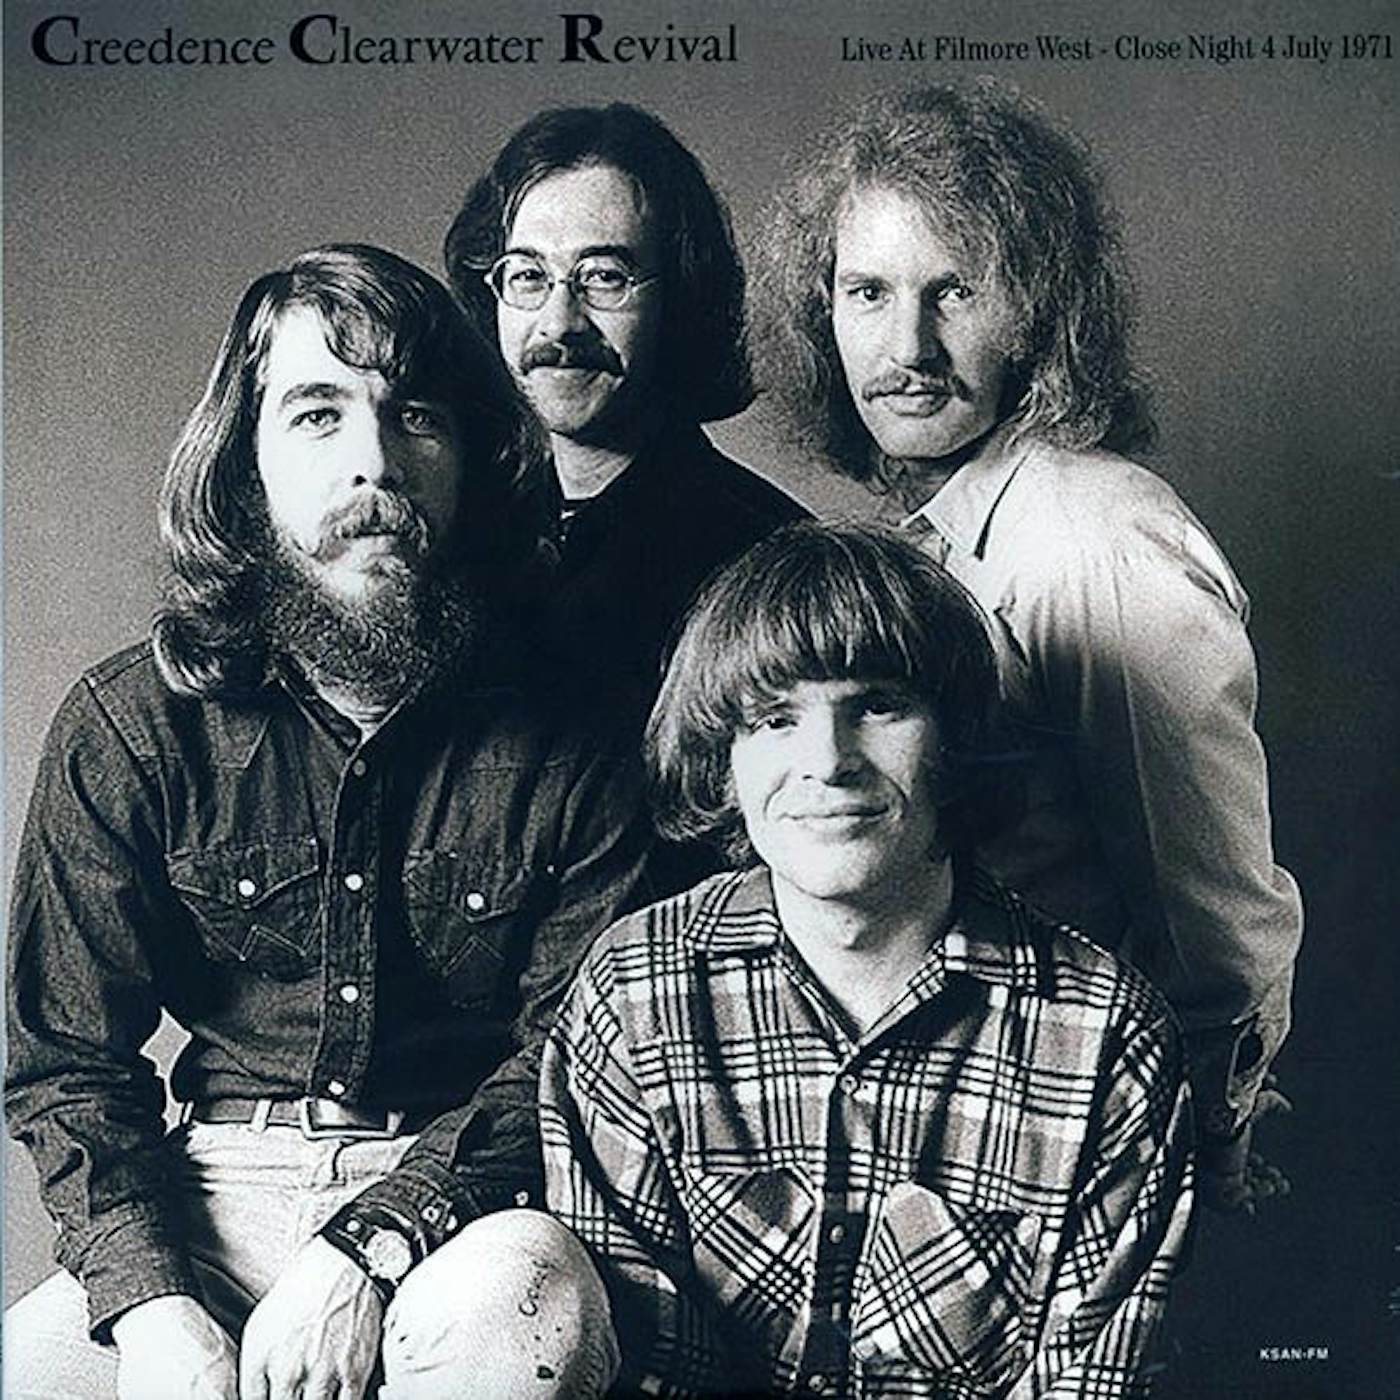 Creedence Clearwater Revival  LP -  Live At Fillmore West: Close Night 4 July 1971 (Vinyl)